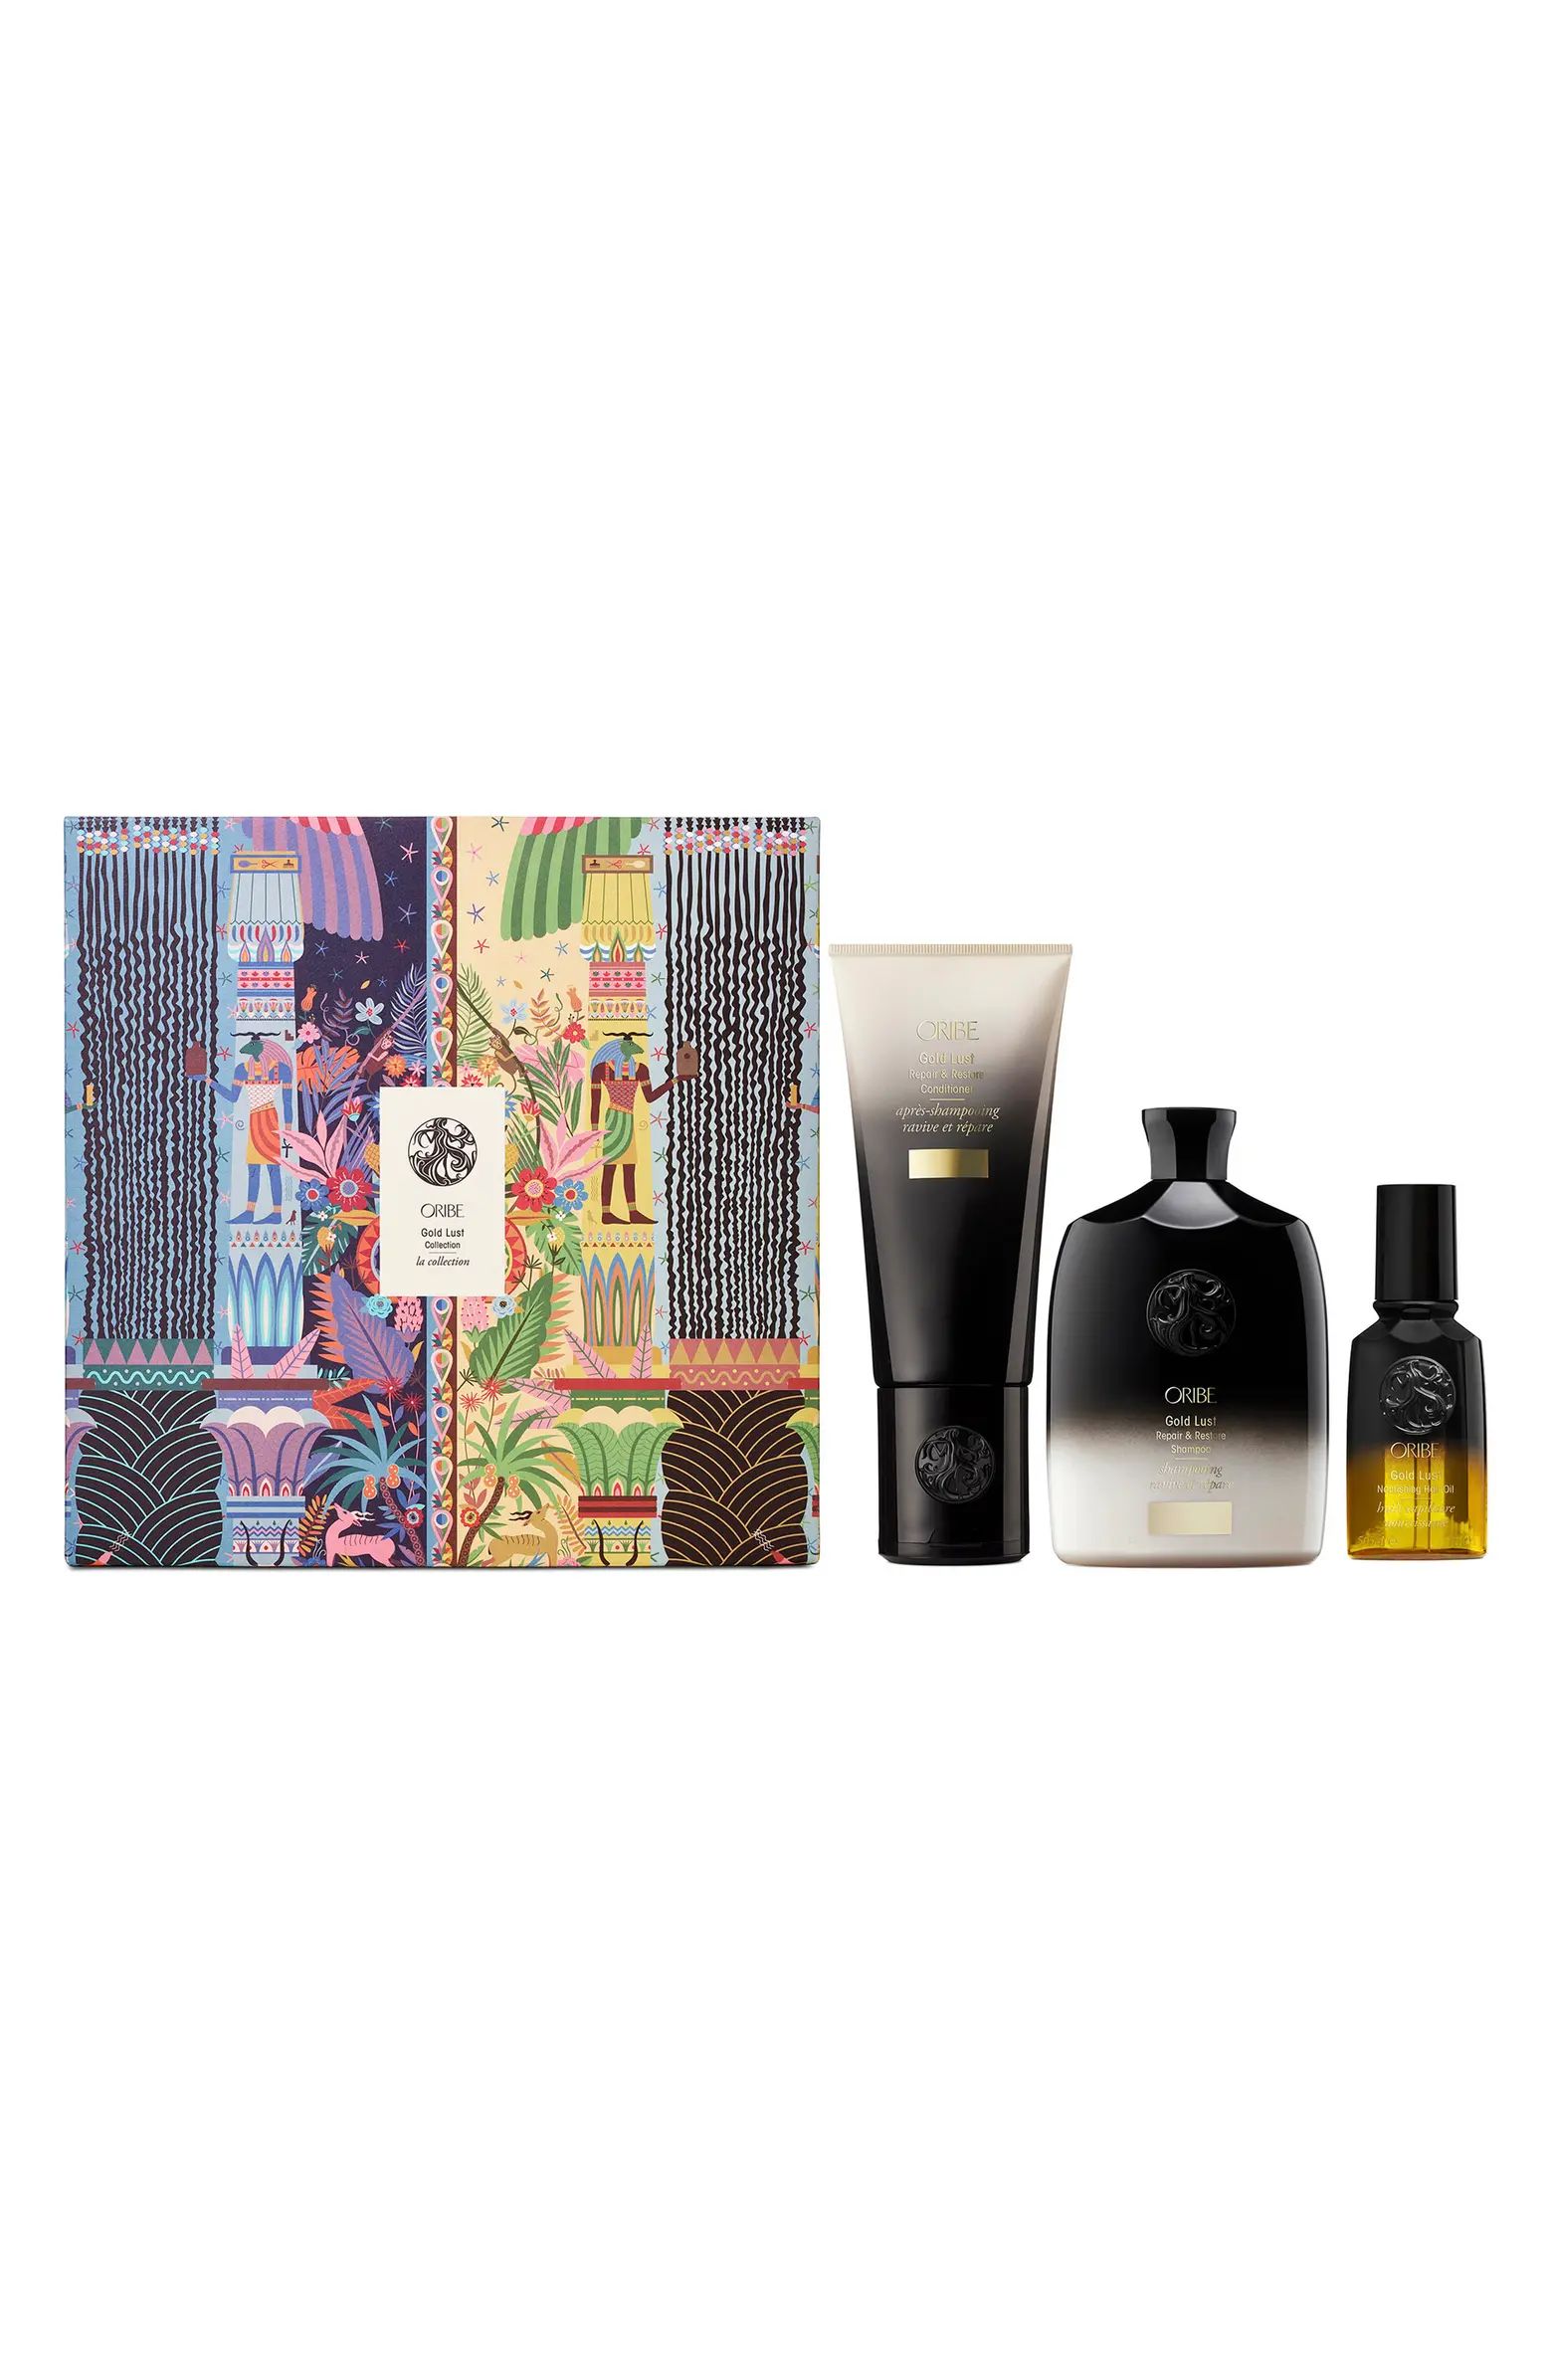 Oribe Gold Lust Collection (Limited Edition) $148 Value | Nordstrom | Nordstrom